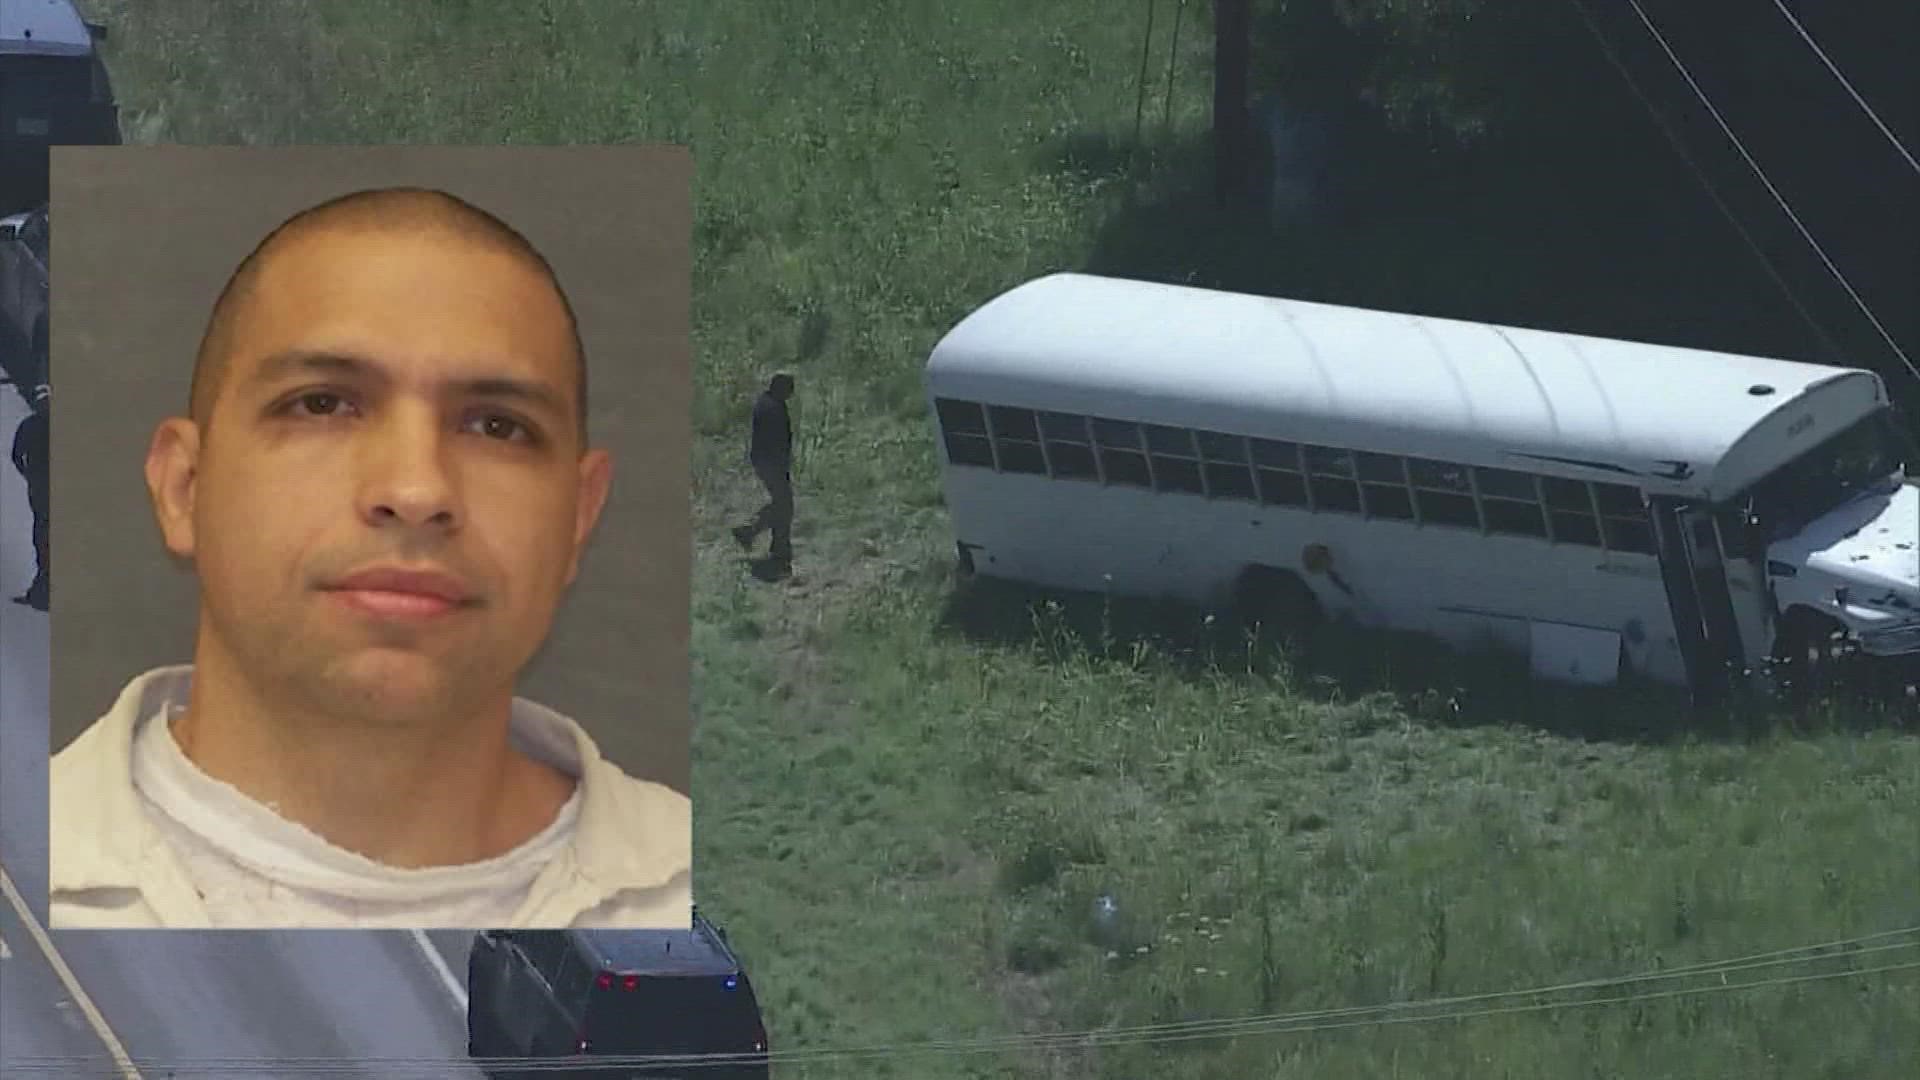 Authorities announced Thursday night that escaped convicted killer Gonzalo Lopez was killed in a shootout with law enforcement officers.